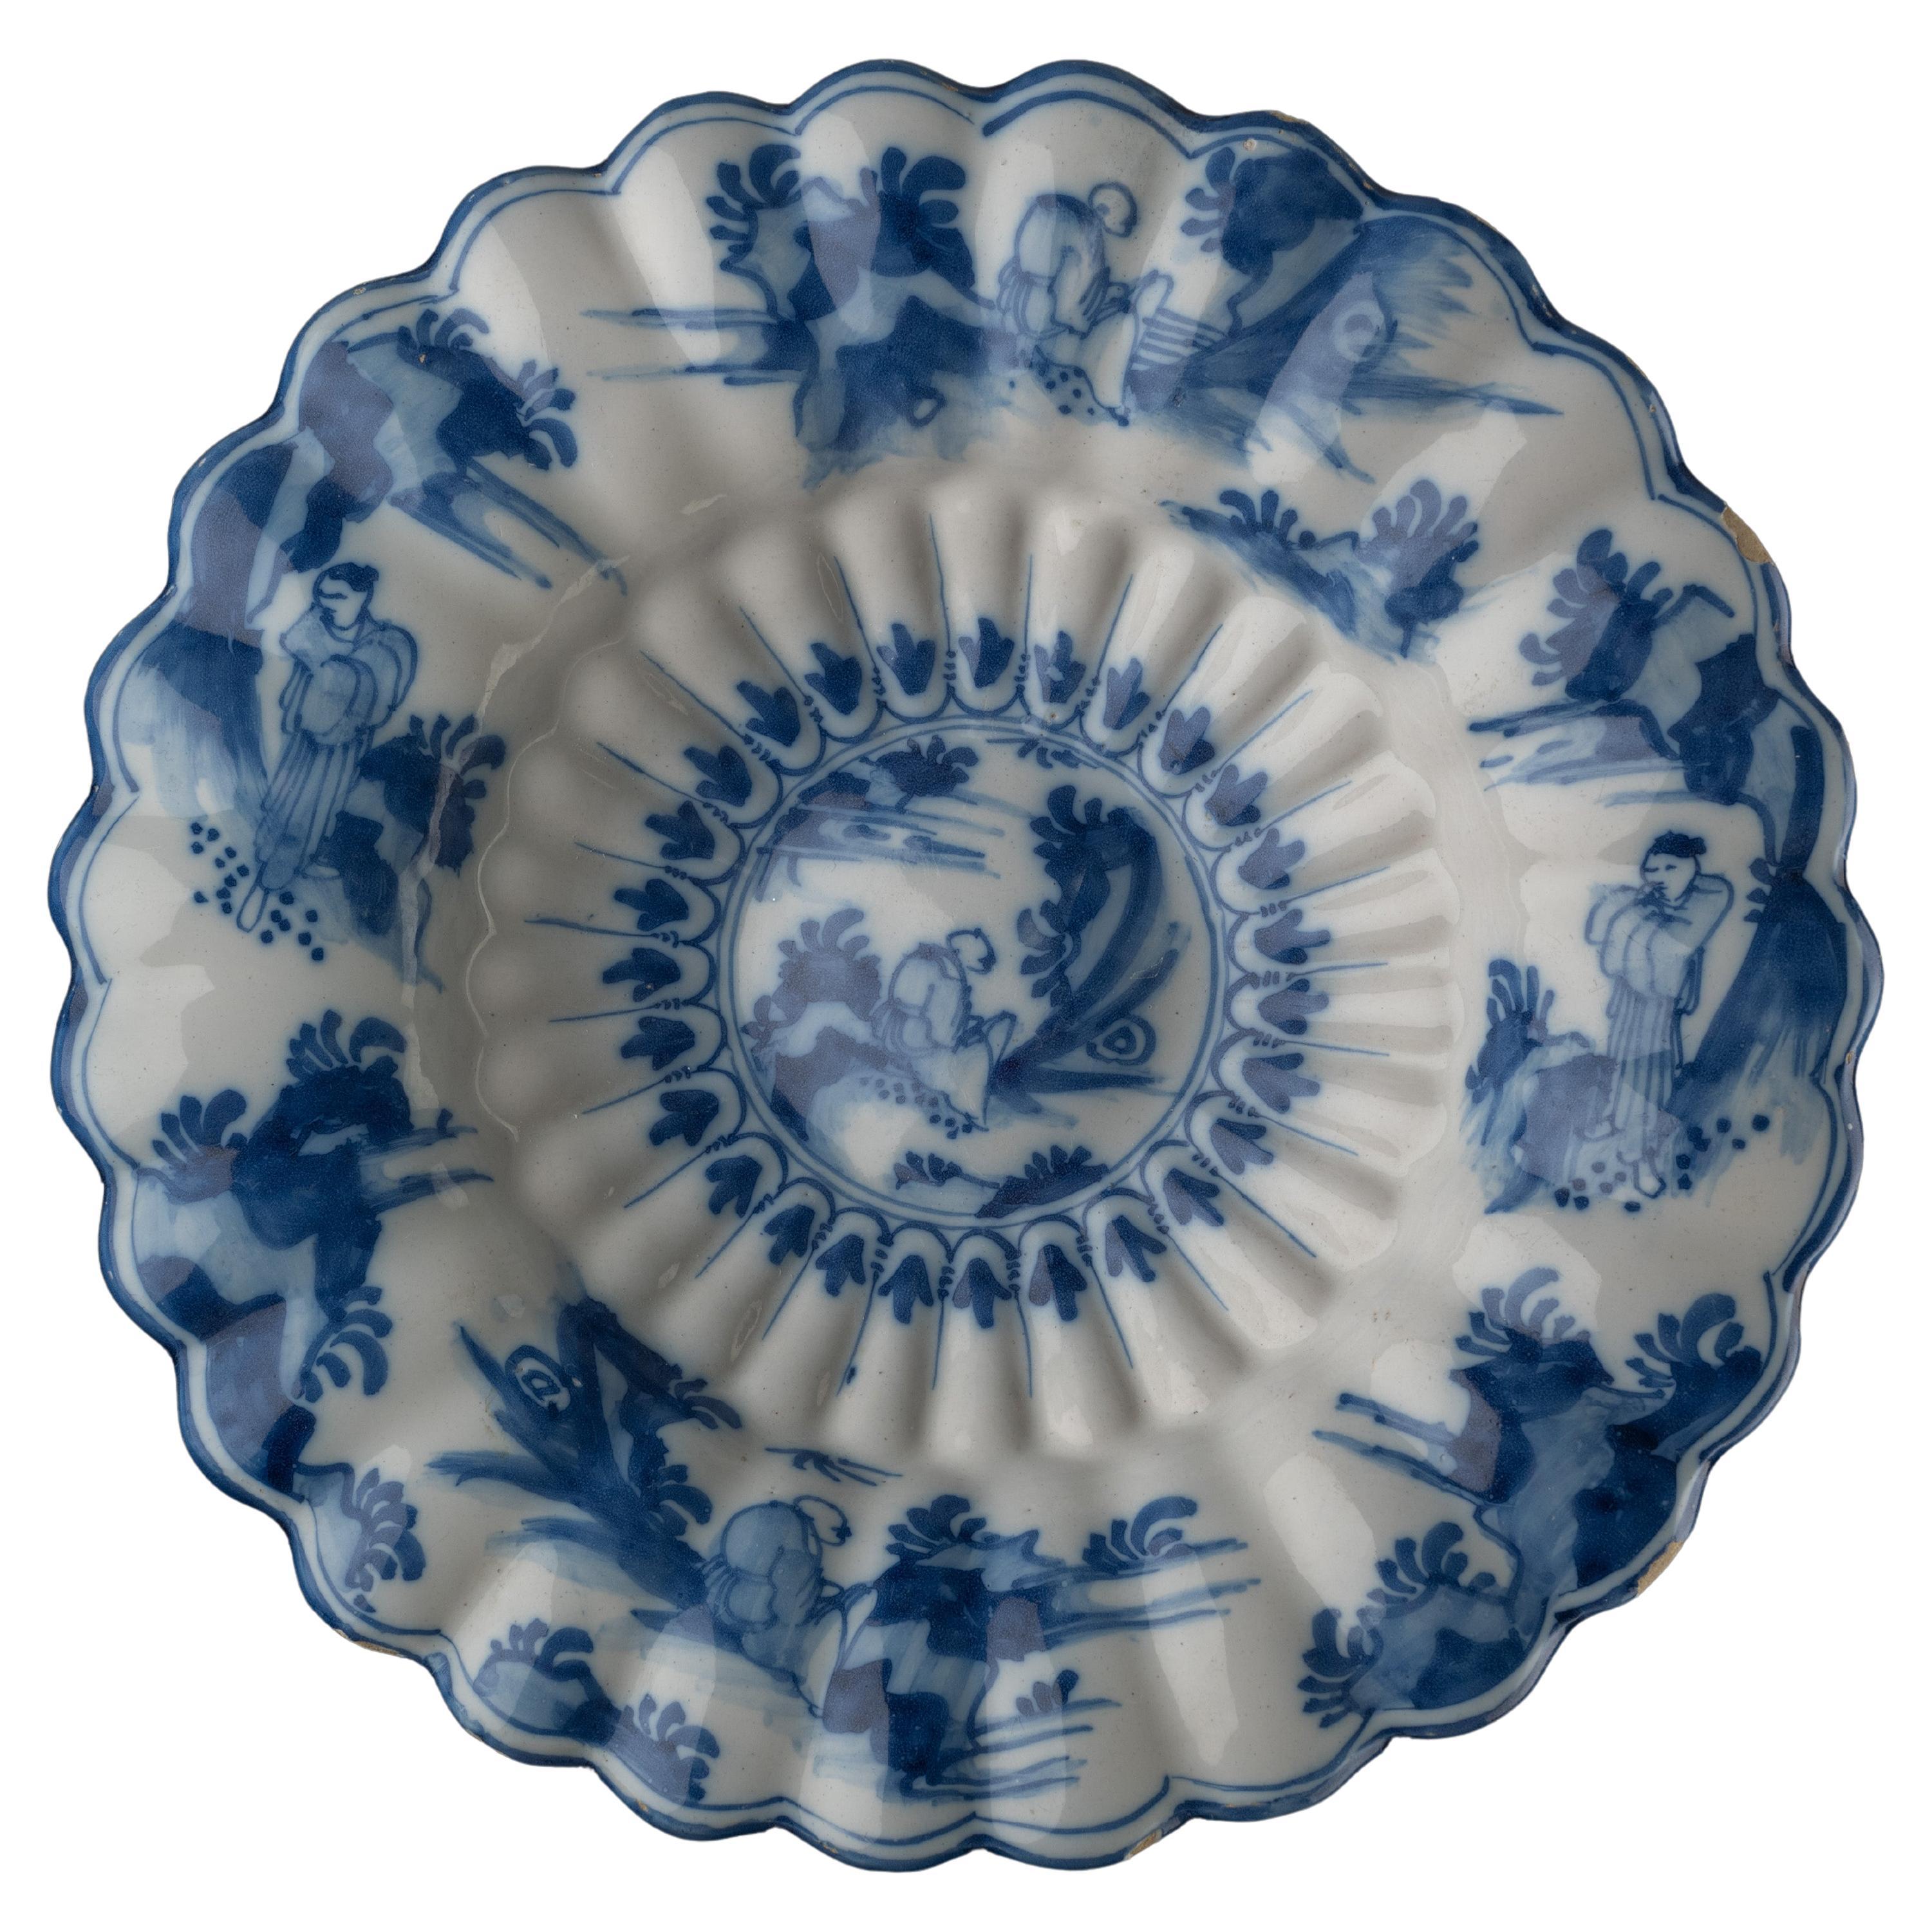 Blue and White Chinoiserie Lobed Dish, Delft, 1650-1680